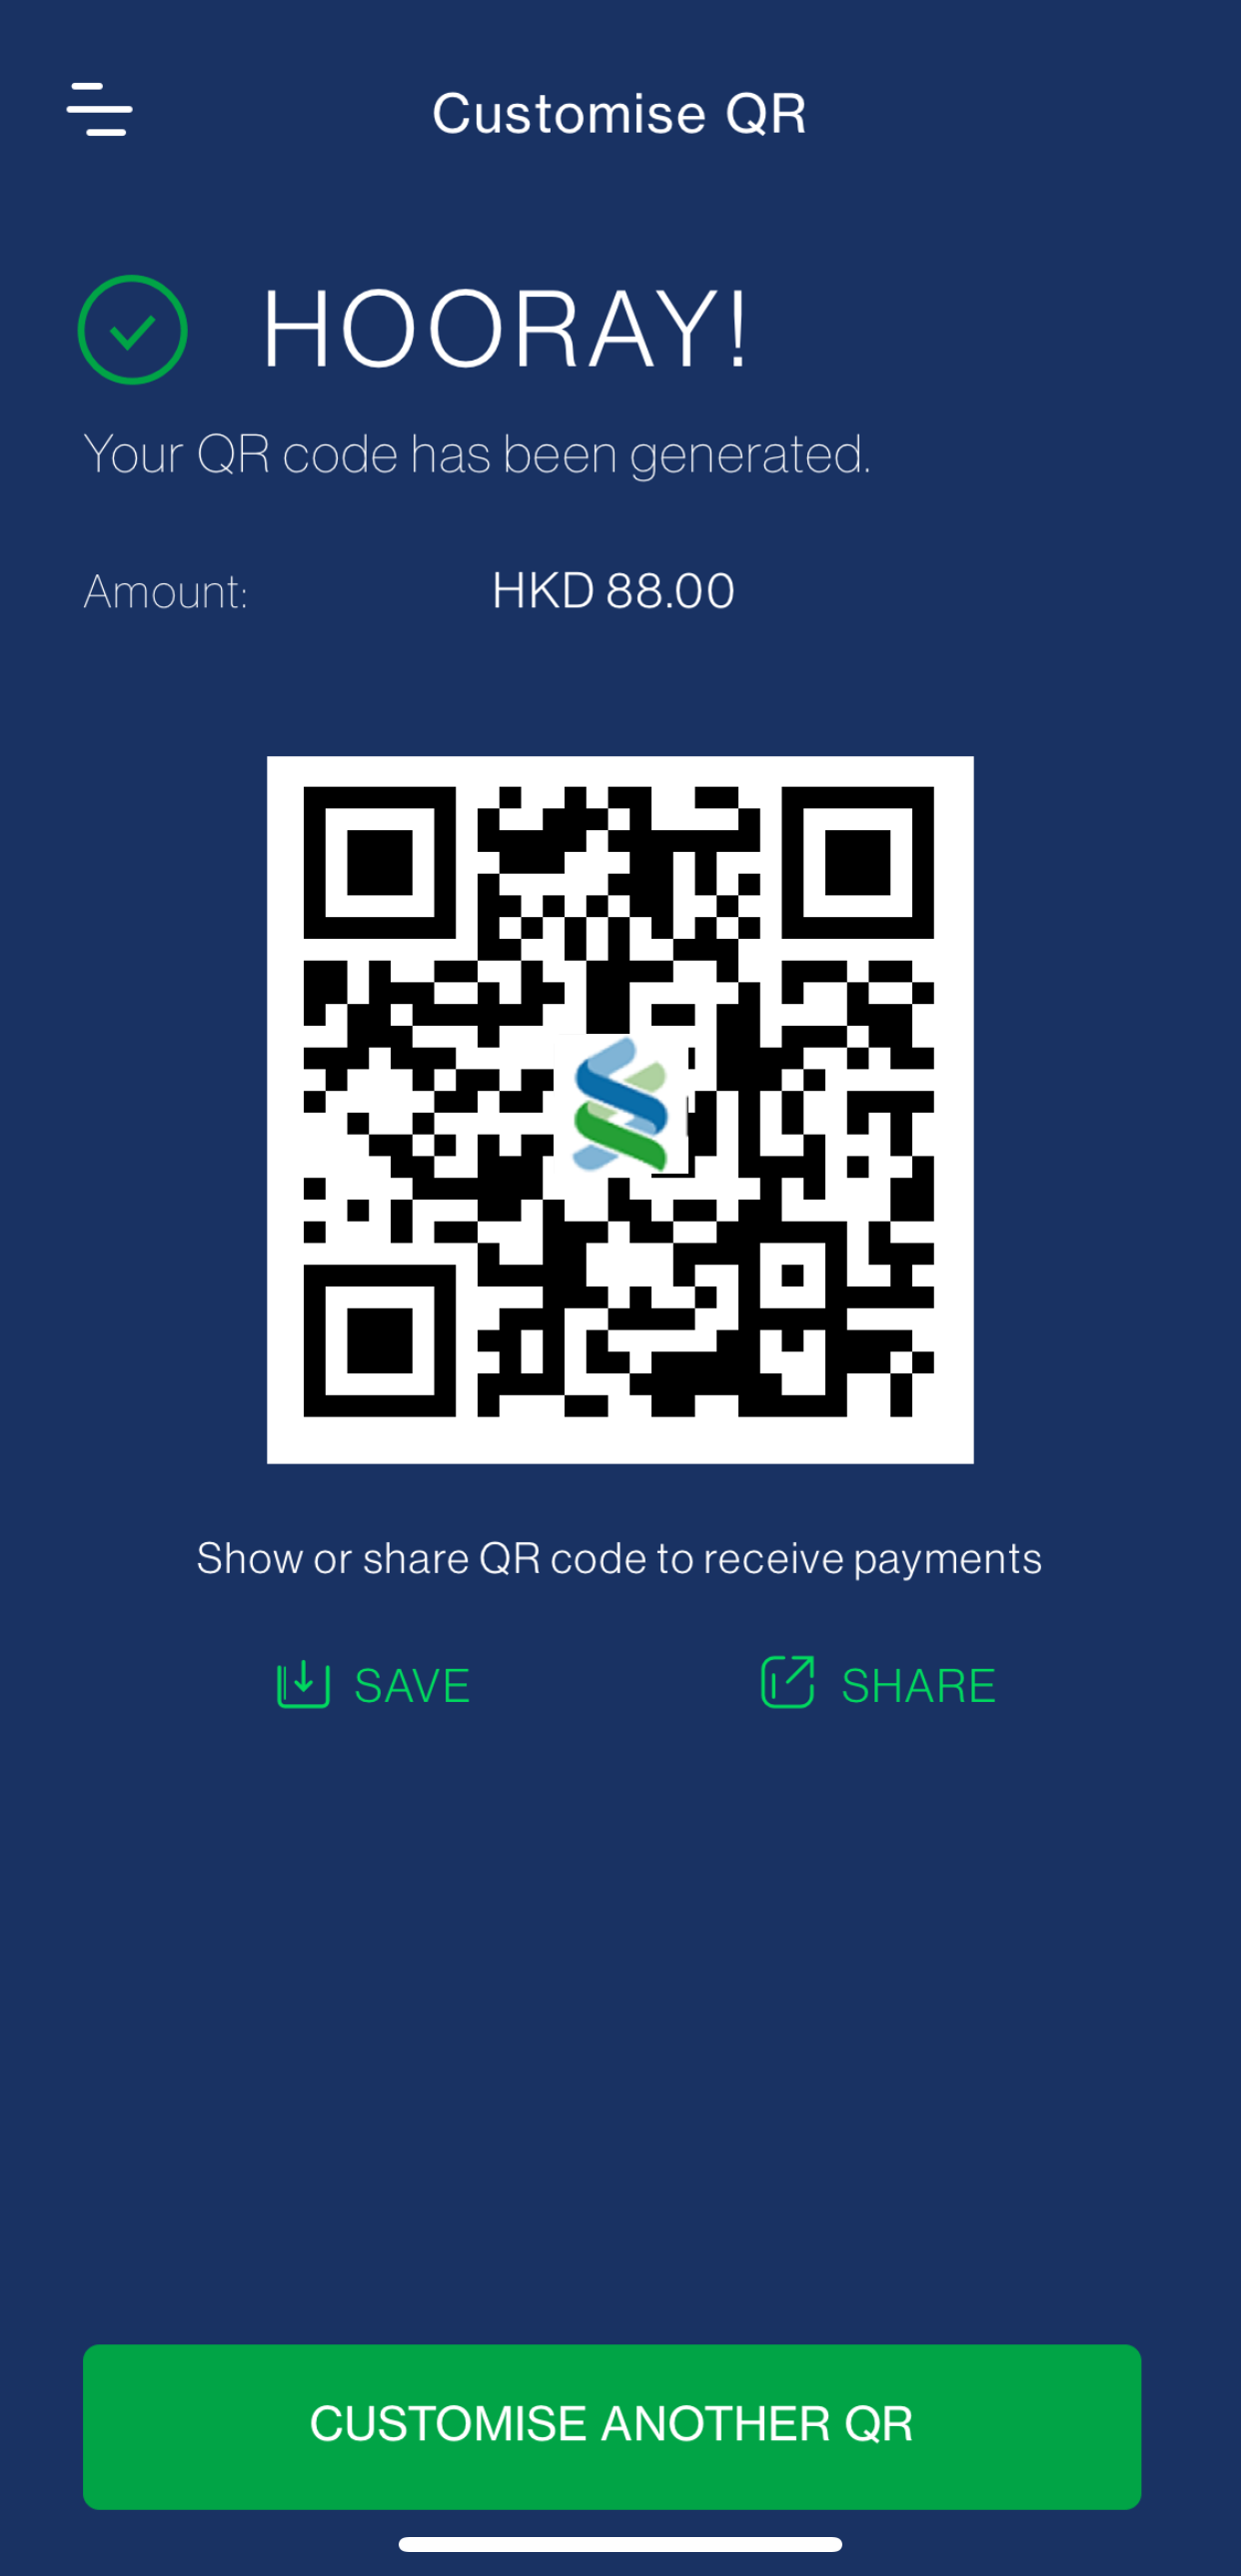 QR code with specified amount is generated - You can now share to receive payments